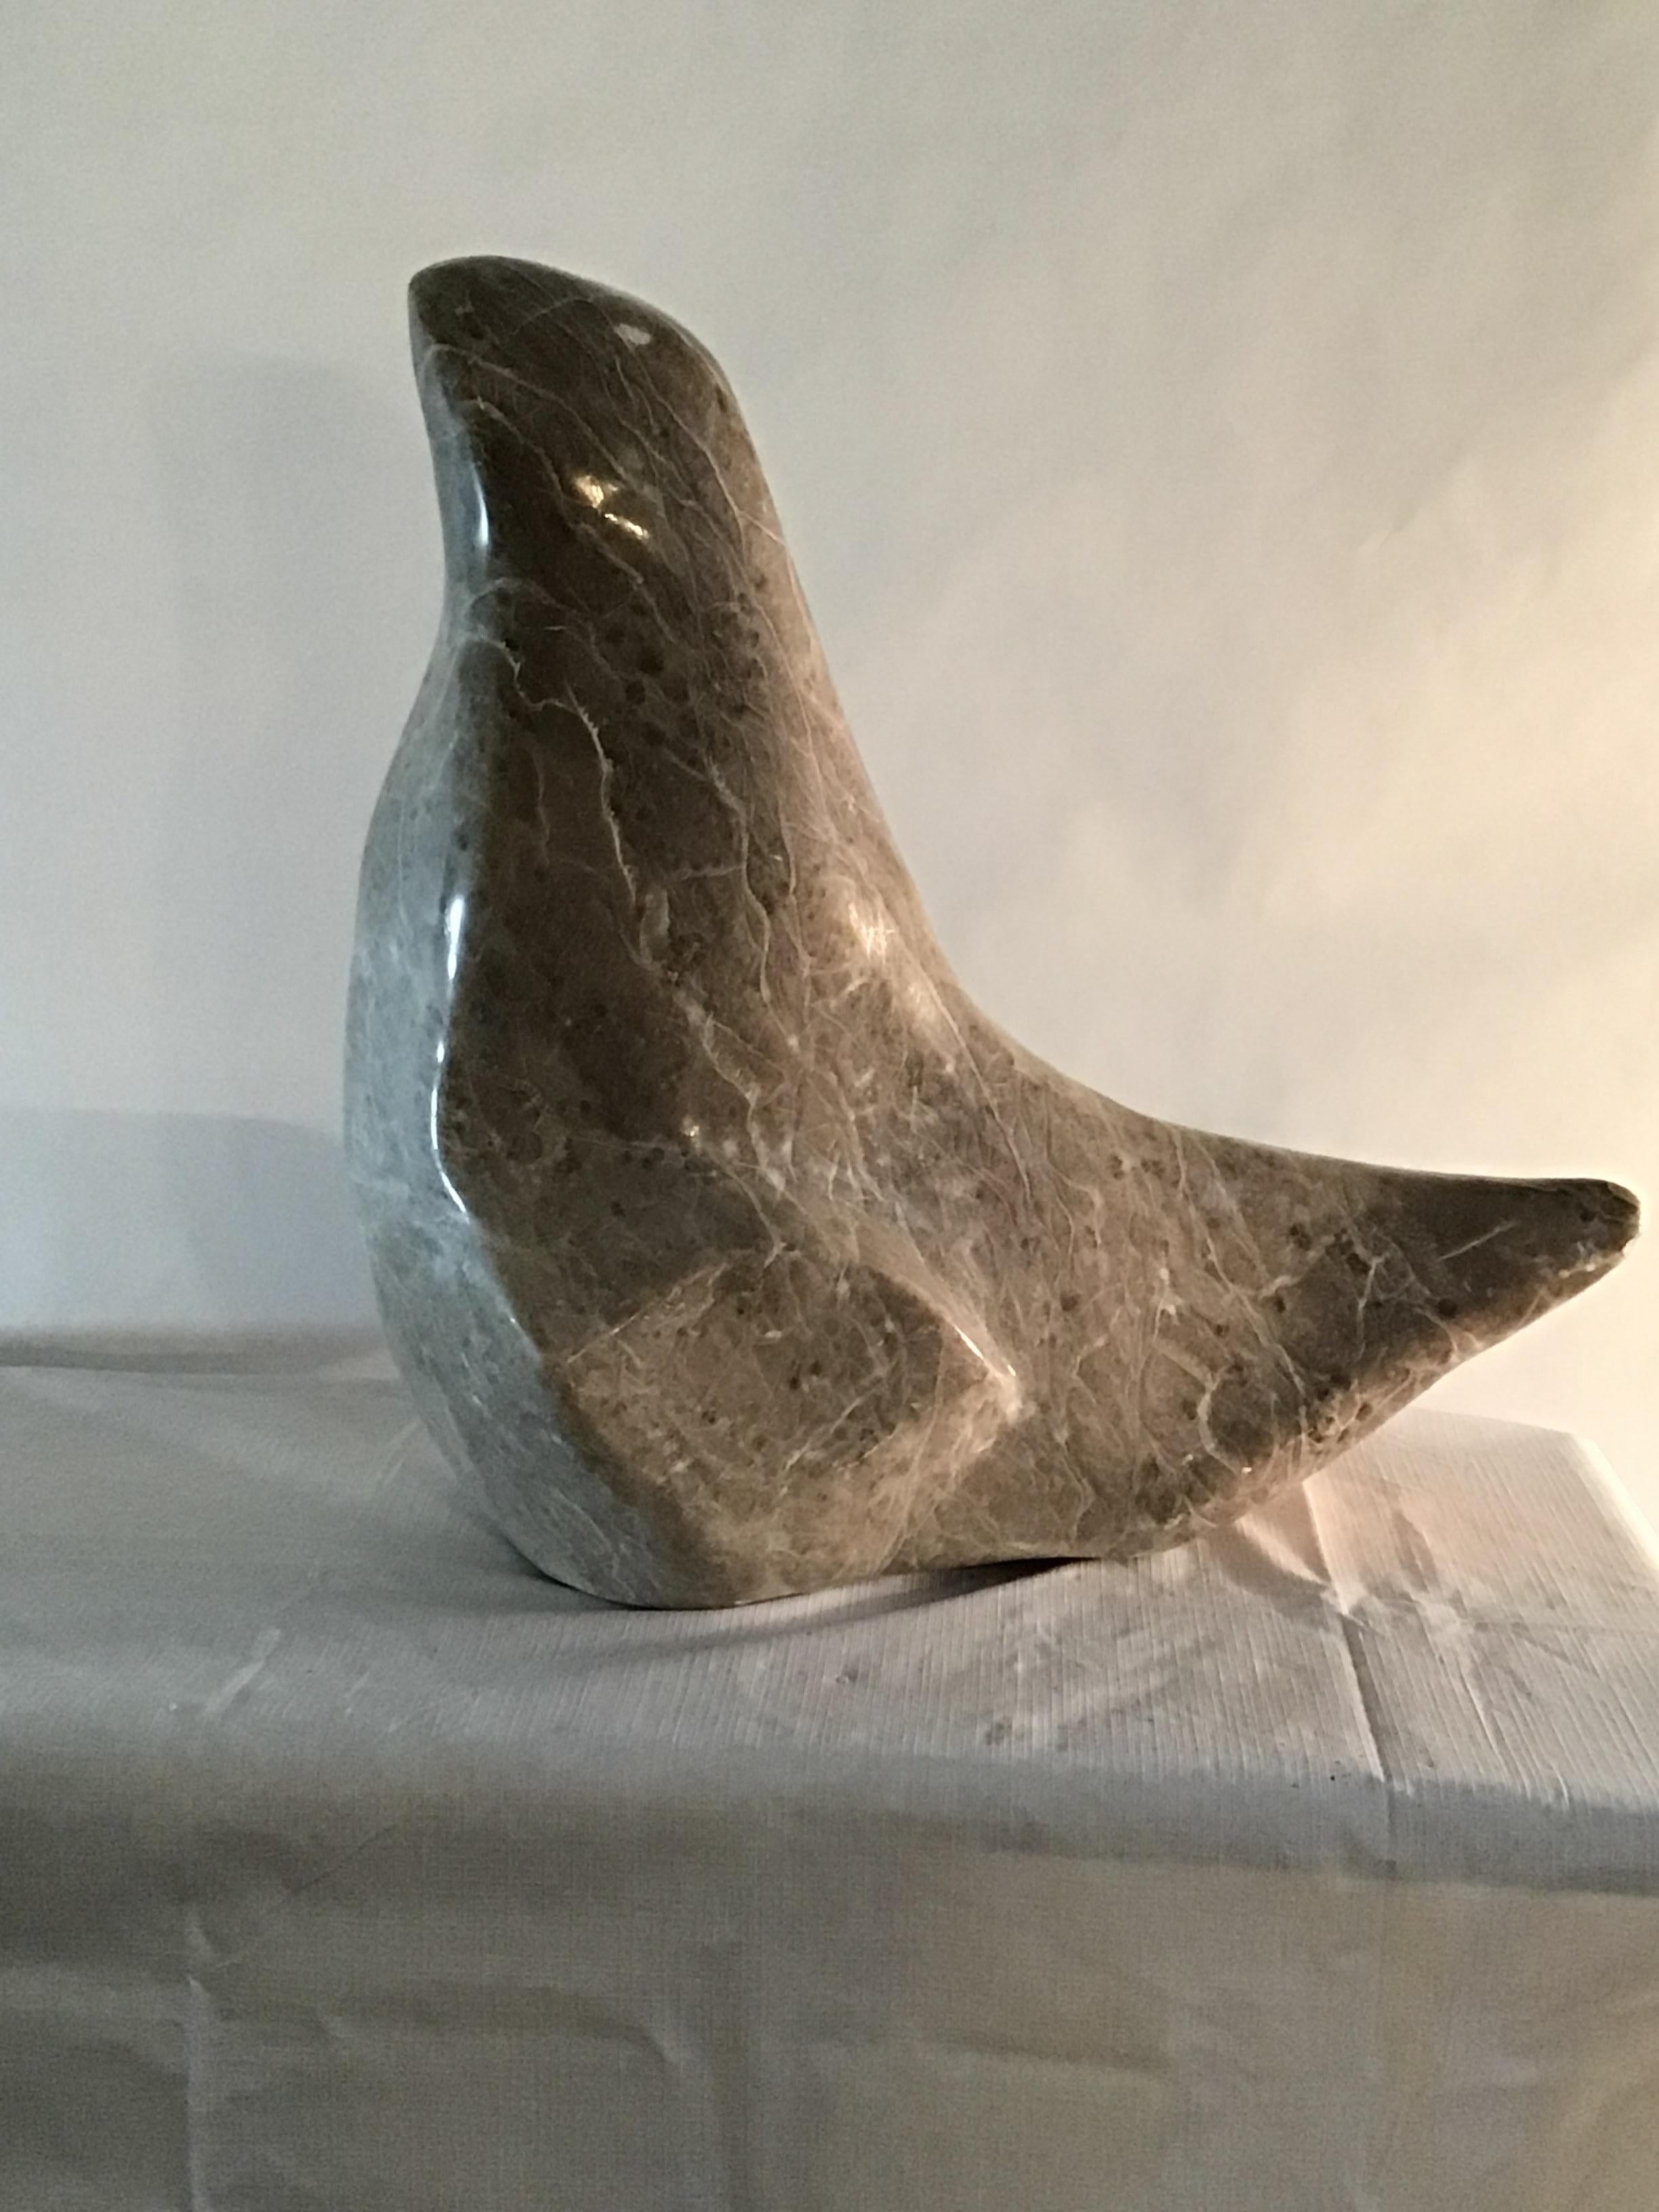 1980s Oversized, Heavy Marble Seal Sculpture 
Signed: Joan Israel 1983.